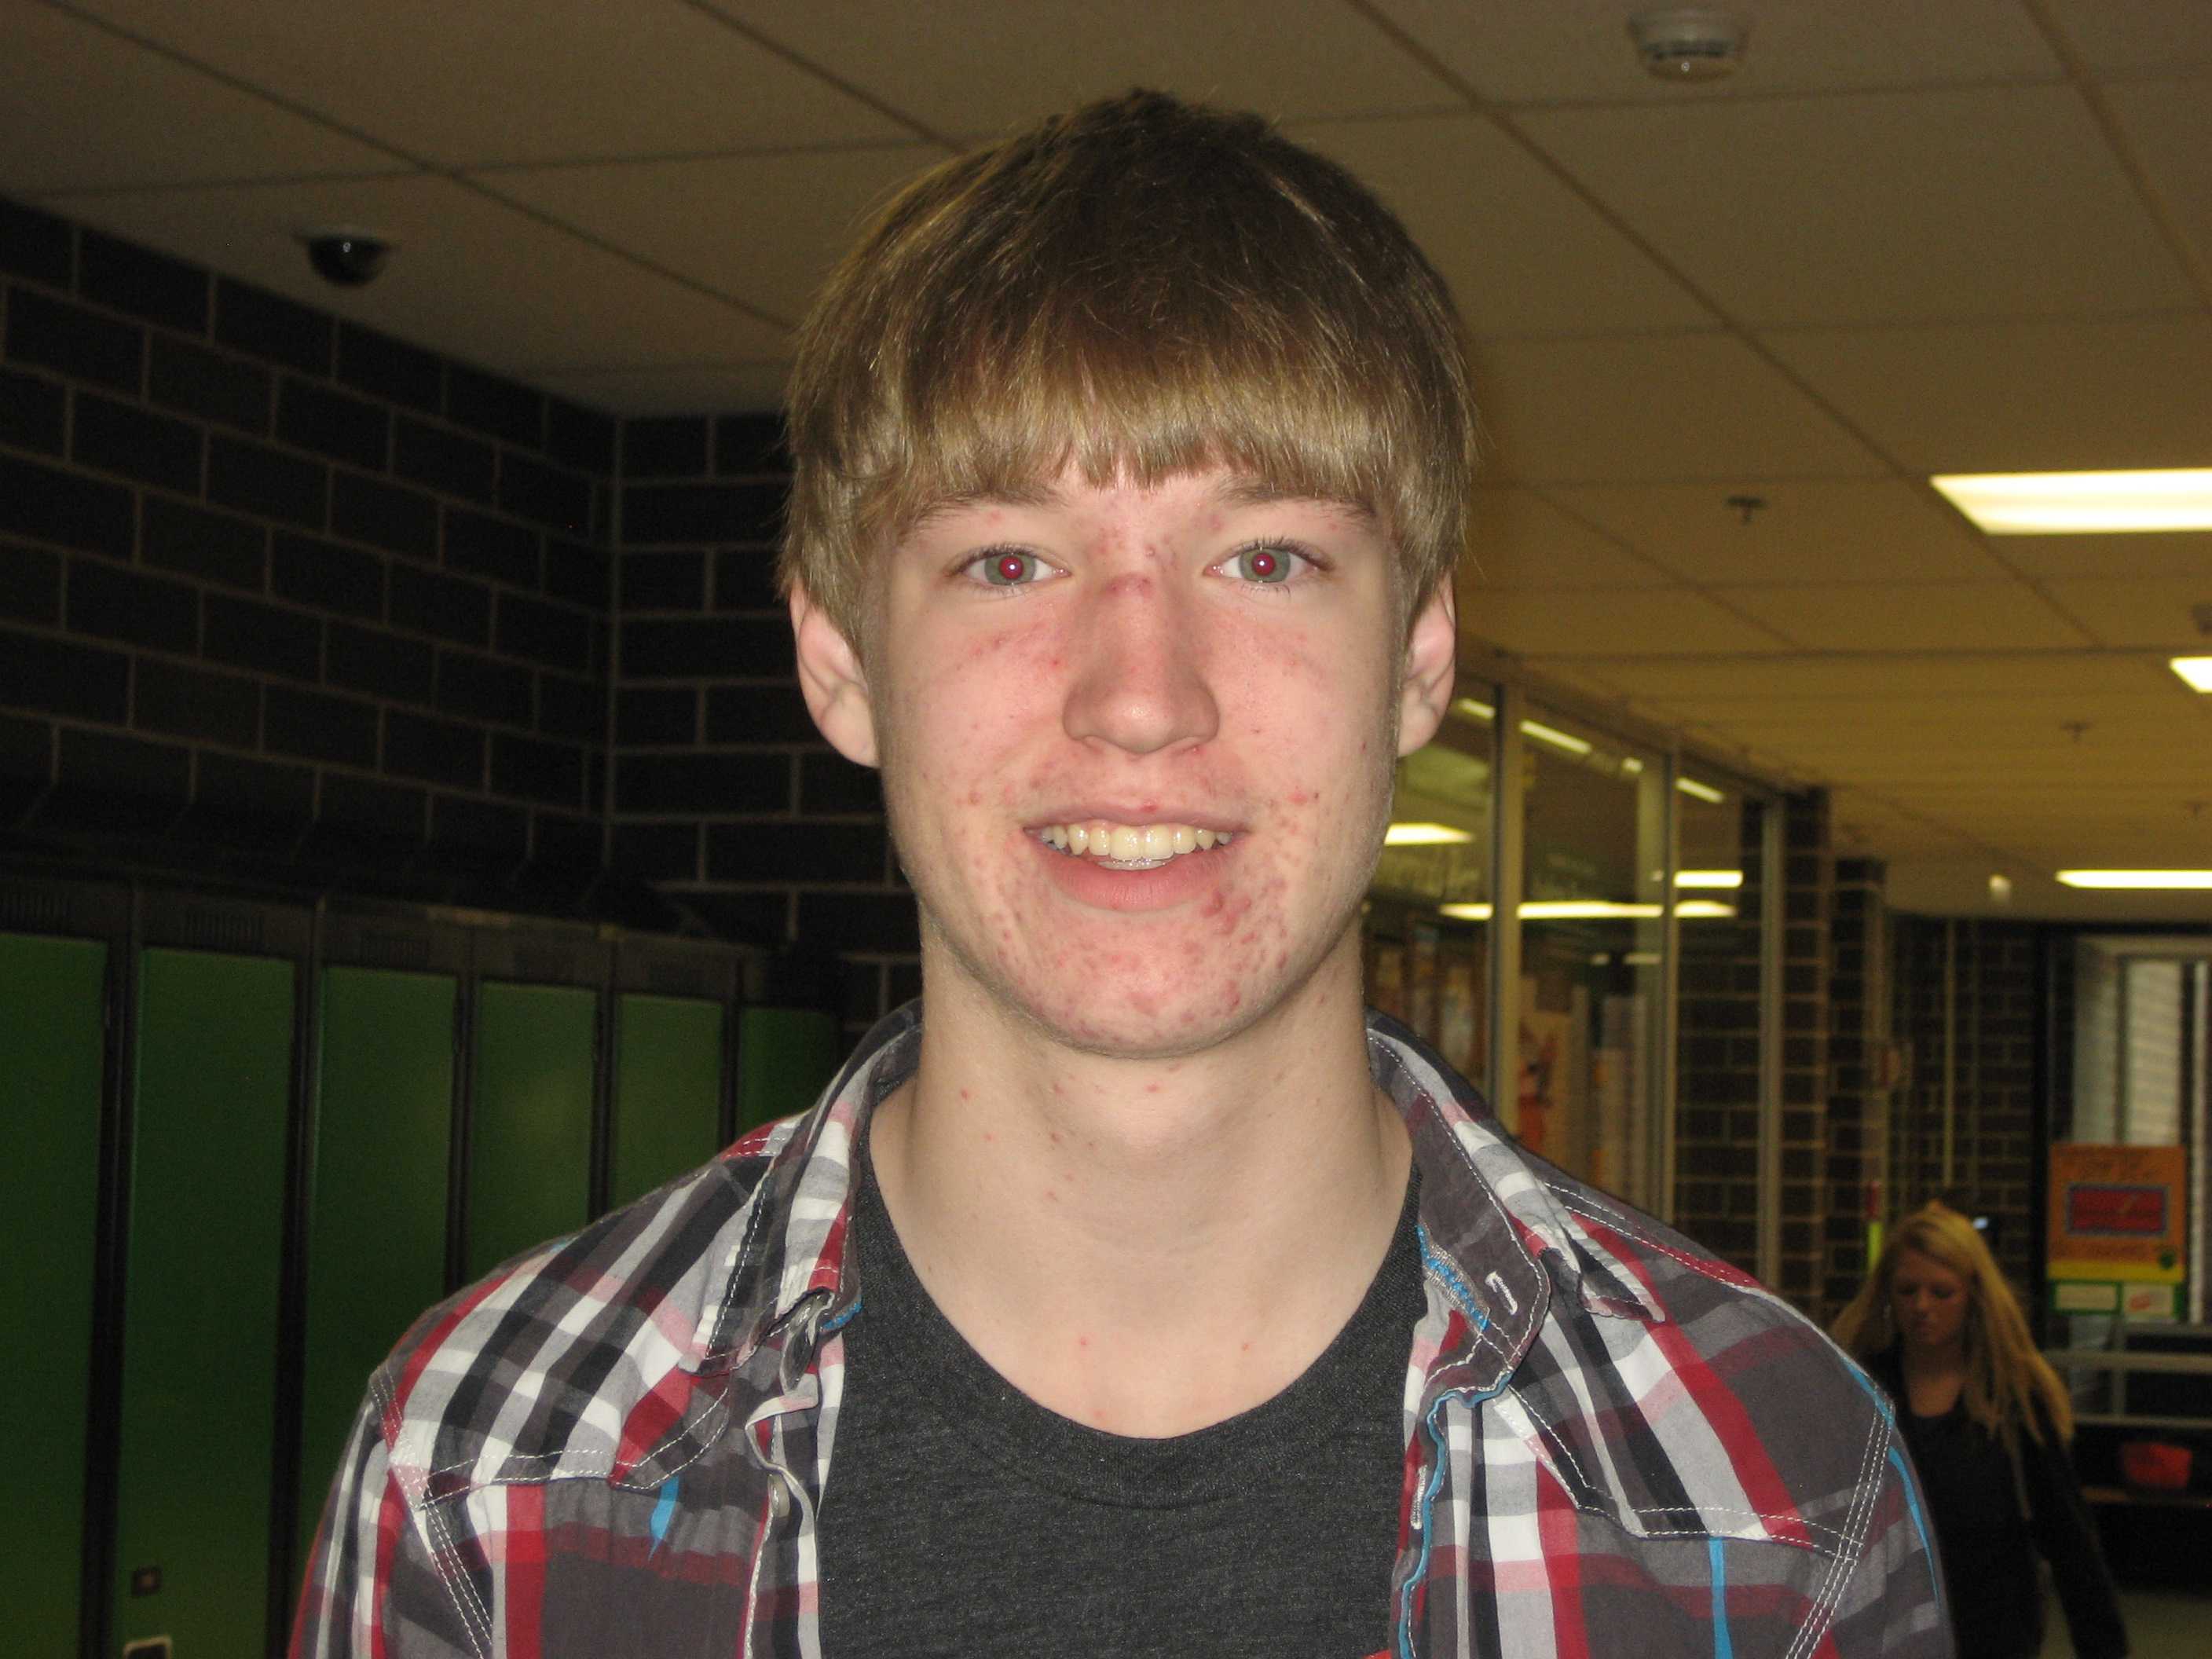 Peter Dennis, jr., will be the only student representing Kennedy in a trip to Germany this year.